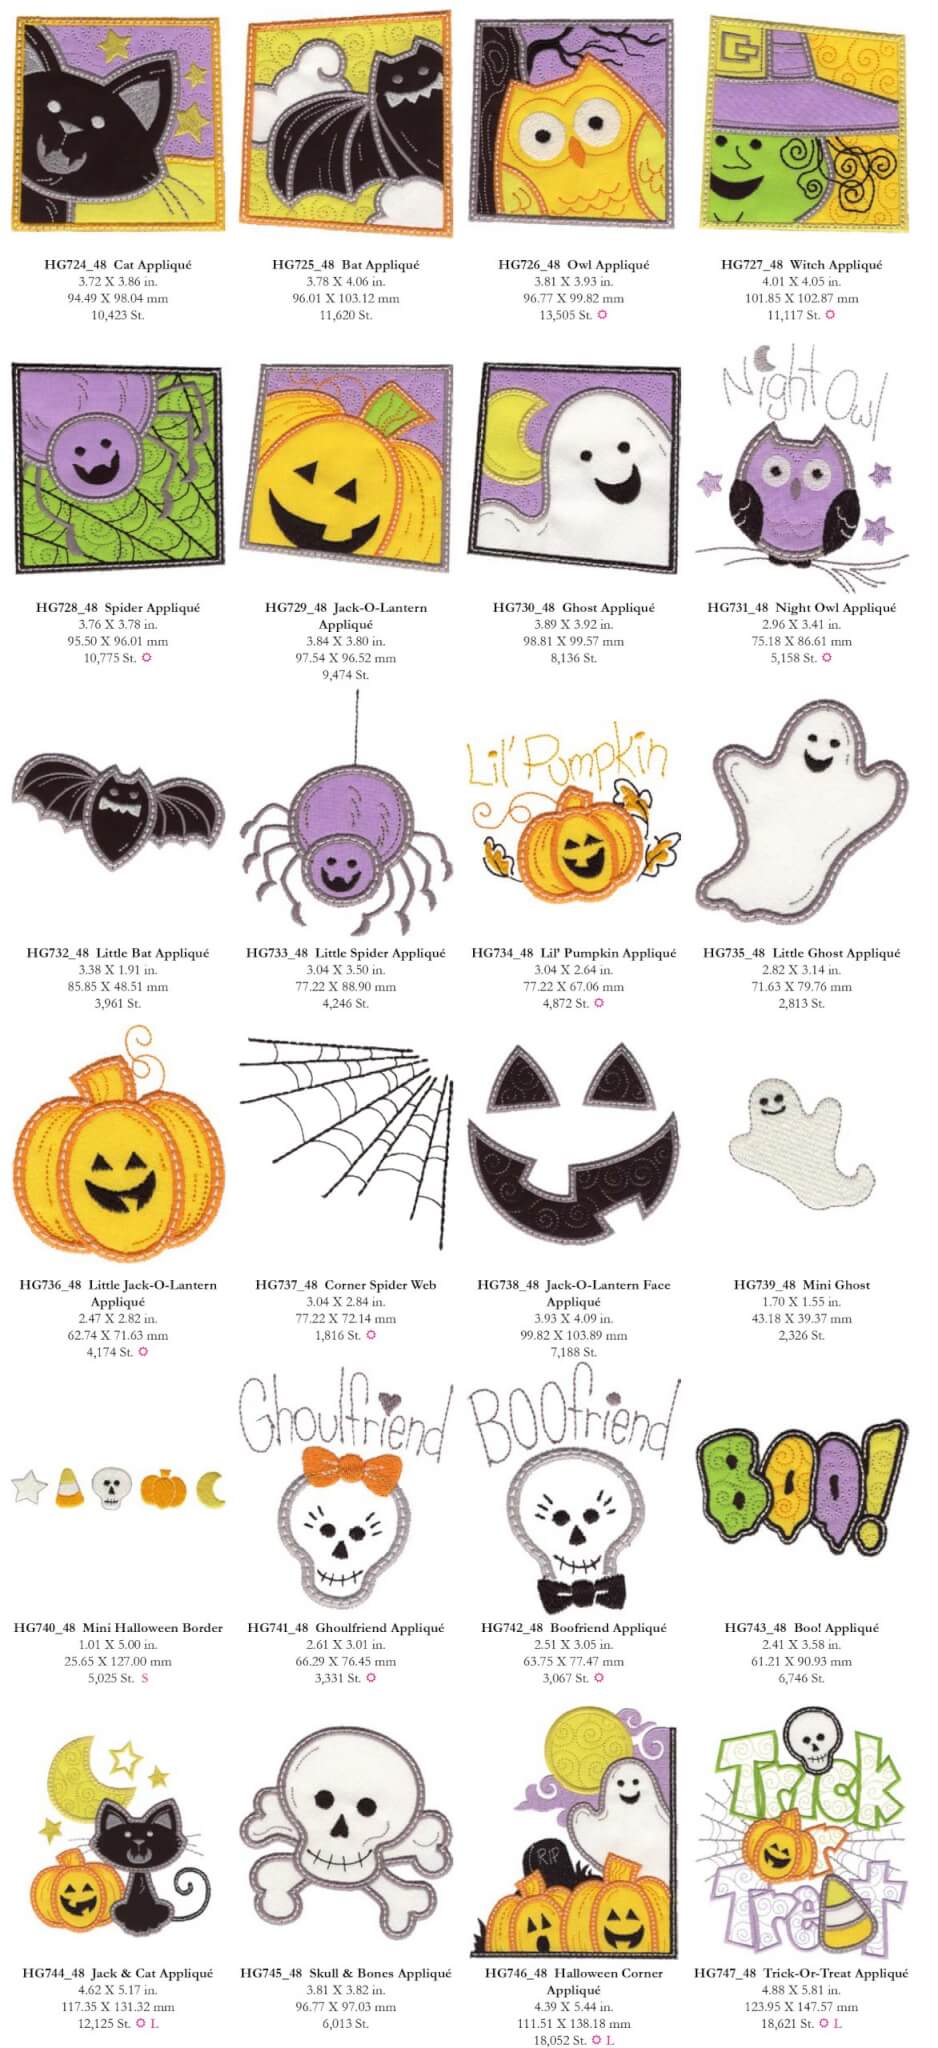 Halloween Treats Embroidery Design Collection OESD #12357 available at Nancy Zieman Productions at ShopNZP.com